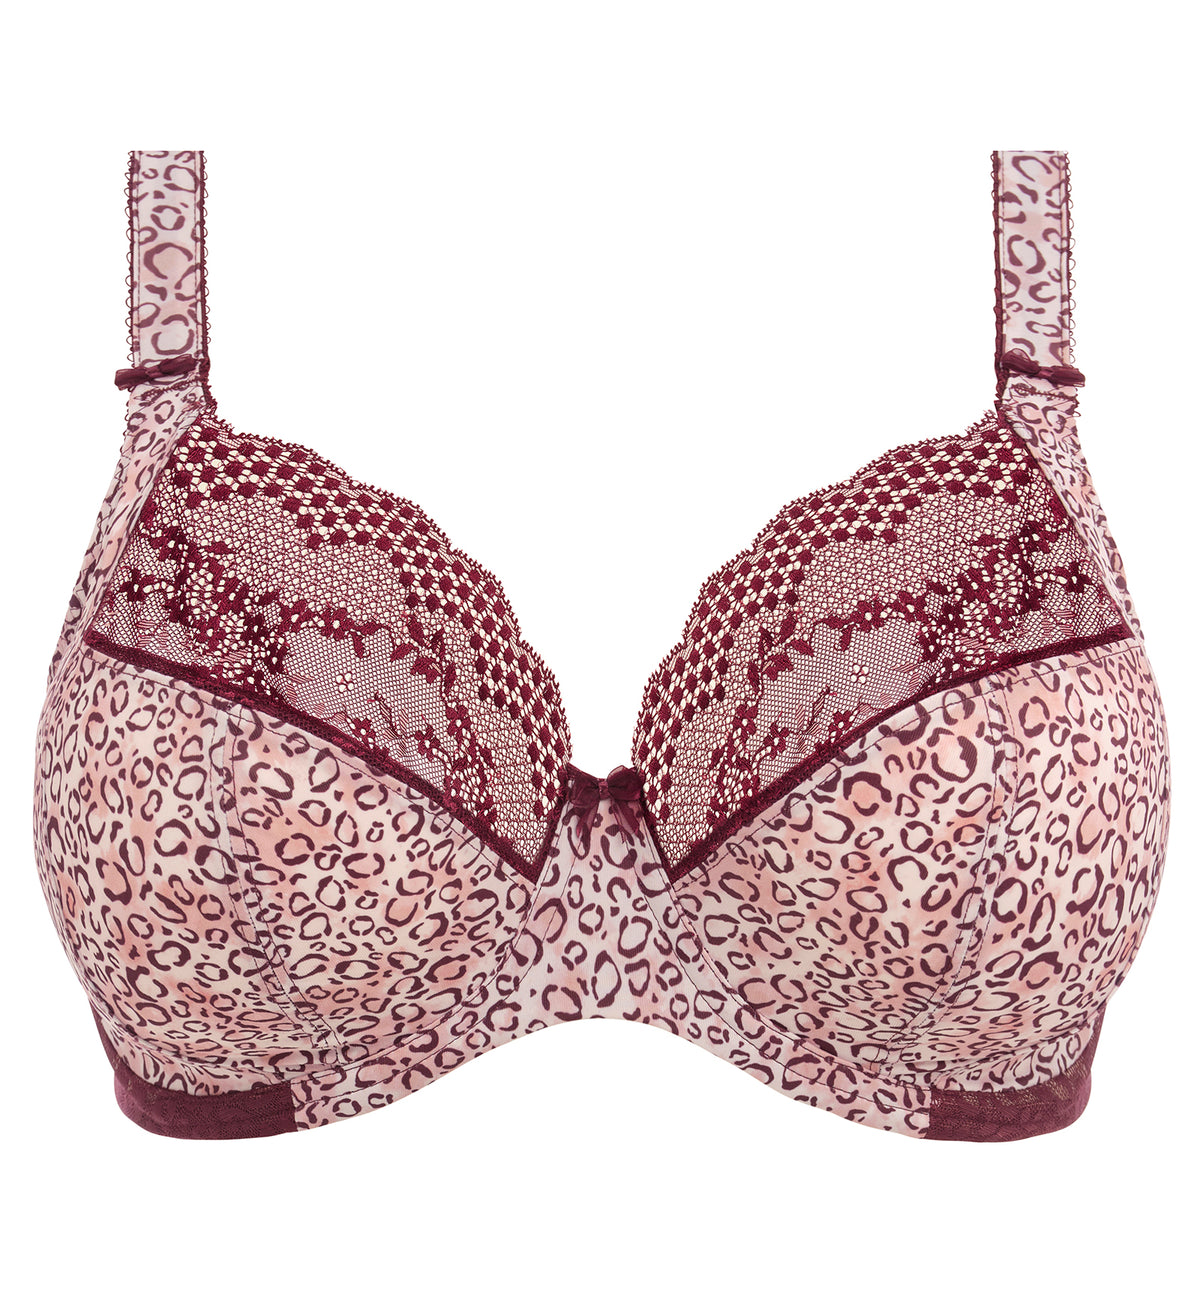 Elomi Lucie Banded Stretch Lace Plunge Underwire Bra (4490),32GG,Wild Thing - Wild Thing,32GG